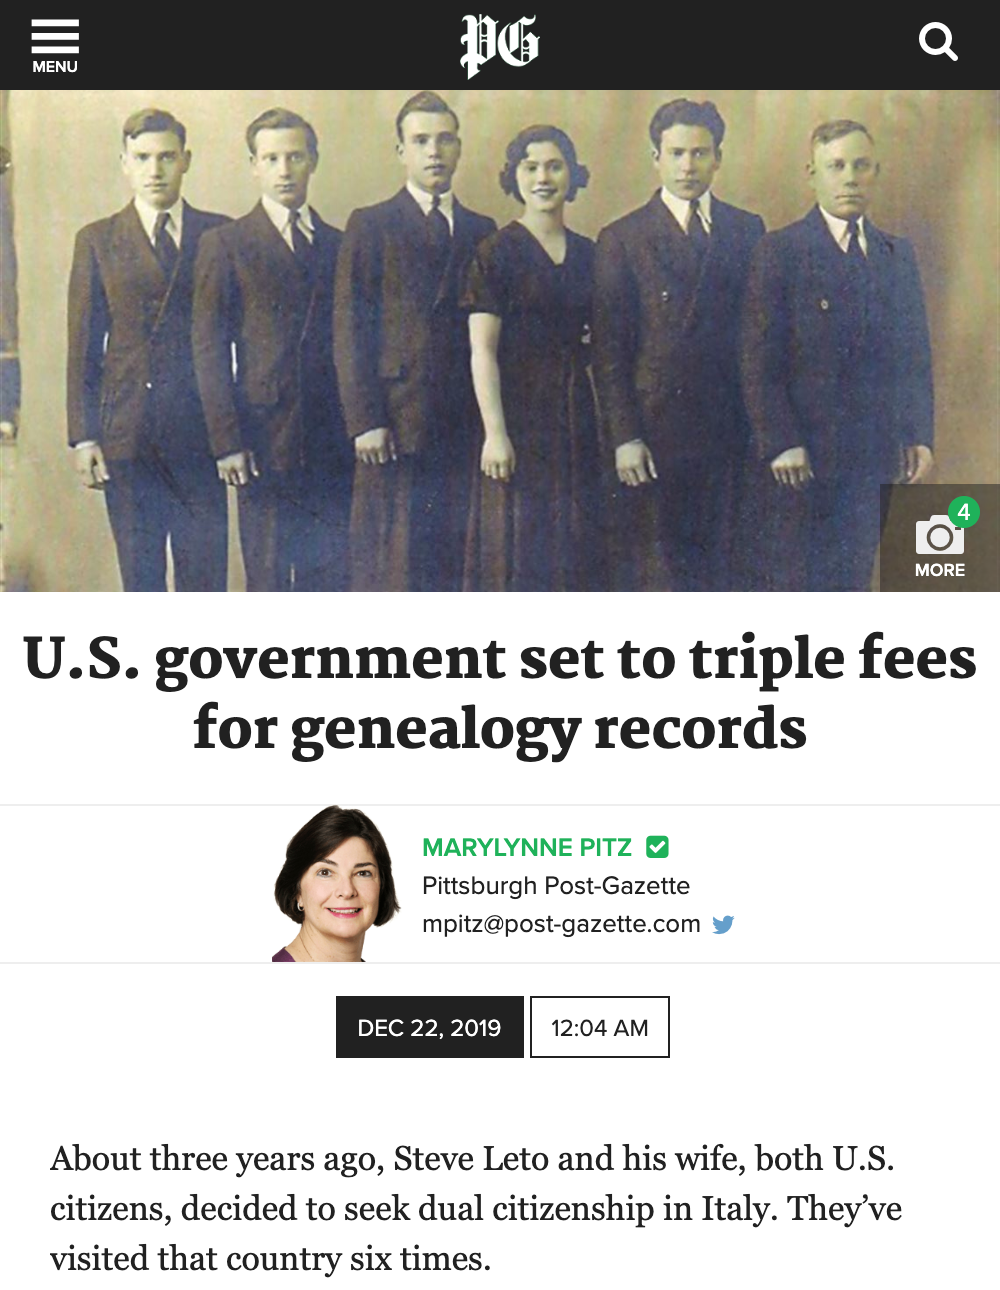 U.S. government set to triple fees for genealogy records